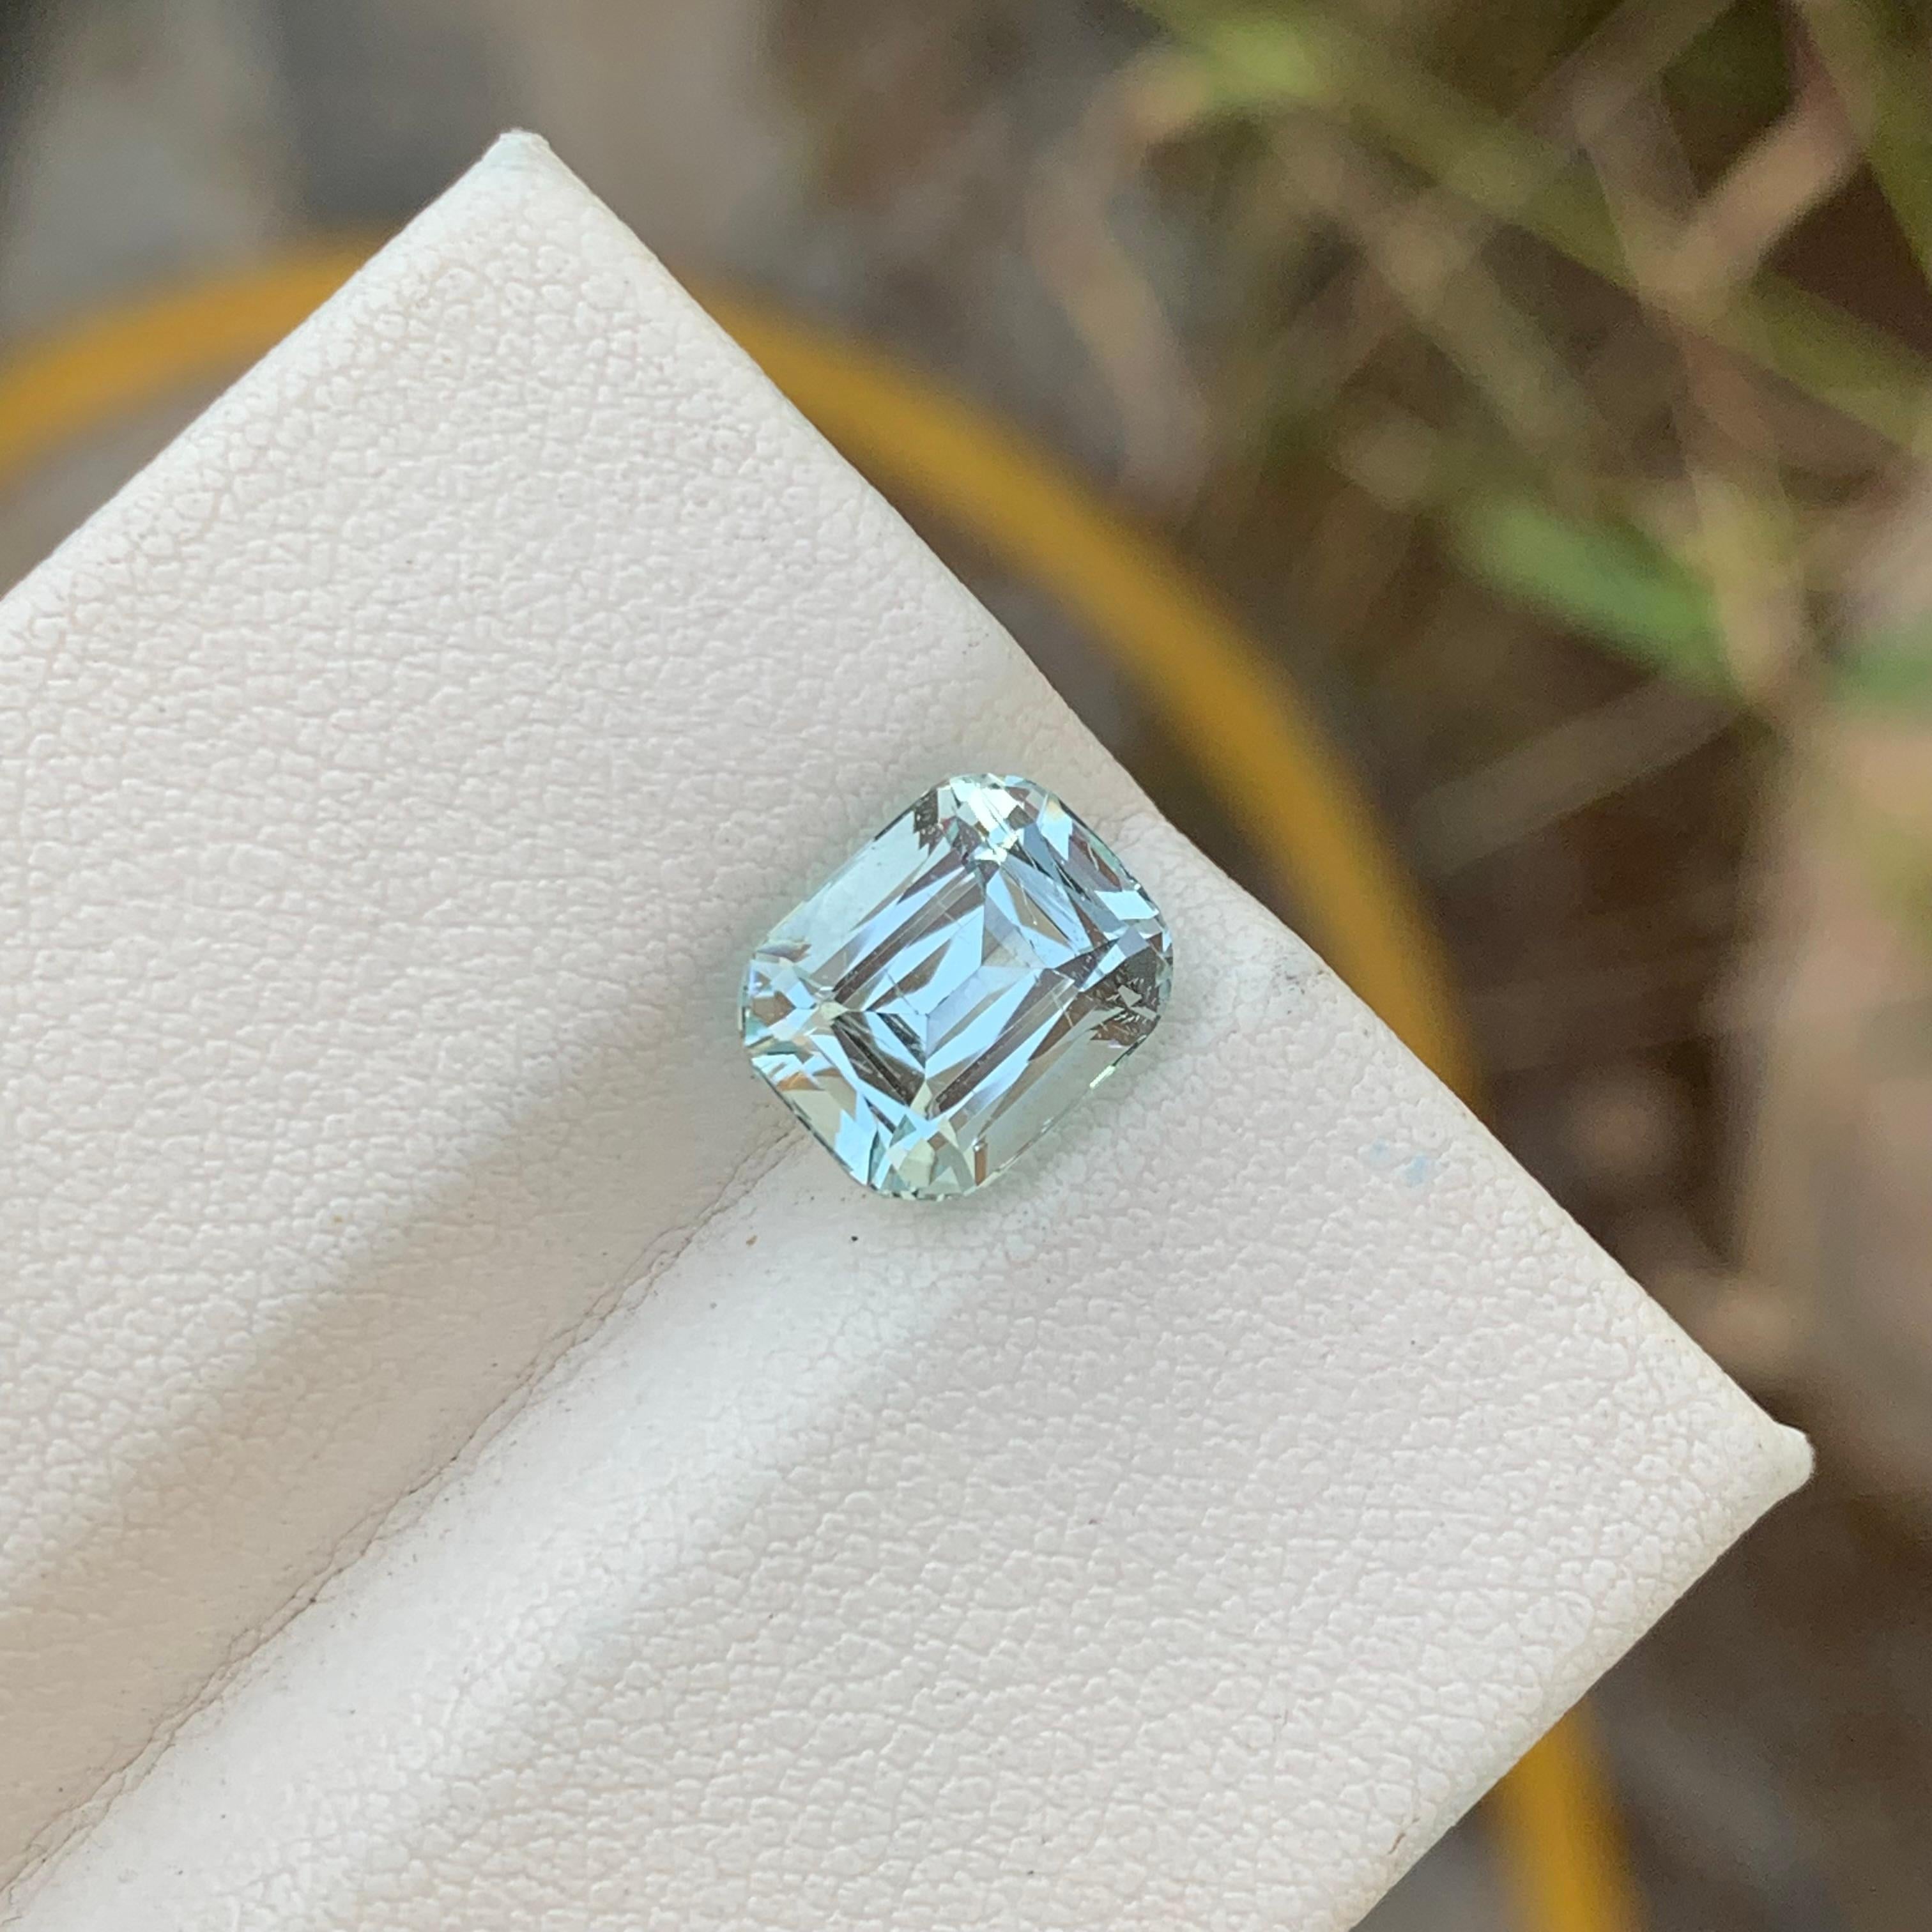 Loose Aquamarine 
Weight: 2.90 Carats 
Dimension: 9.1x7.5x6.1 Mm
Origin: Pakistan
Shape: Cushion 
Color: Light Blue 
Treatment; Non
Certificate: On Demand
Aquamarine is a mesmerizing and sought-after gemstone known for its stunning blue color